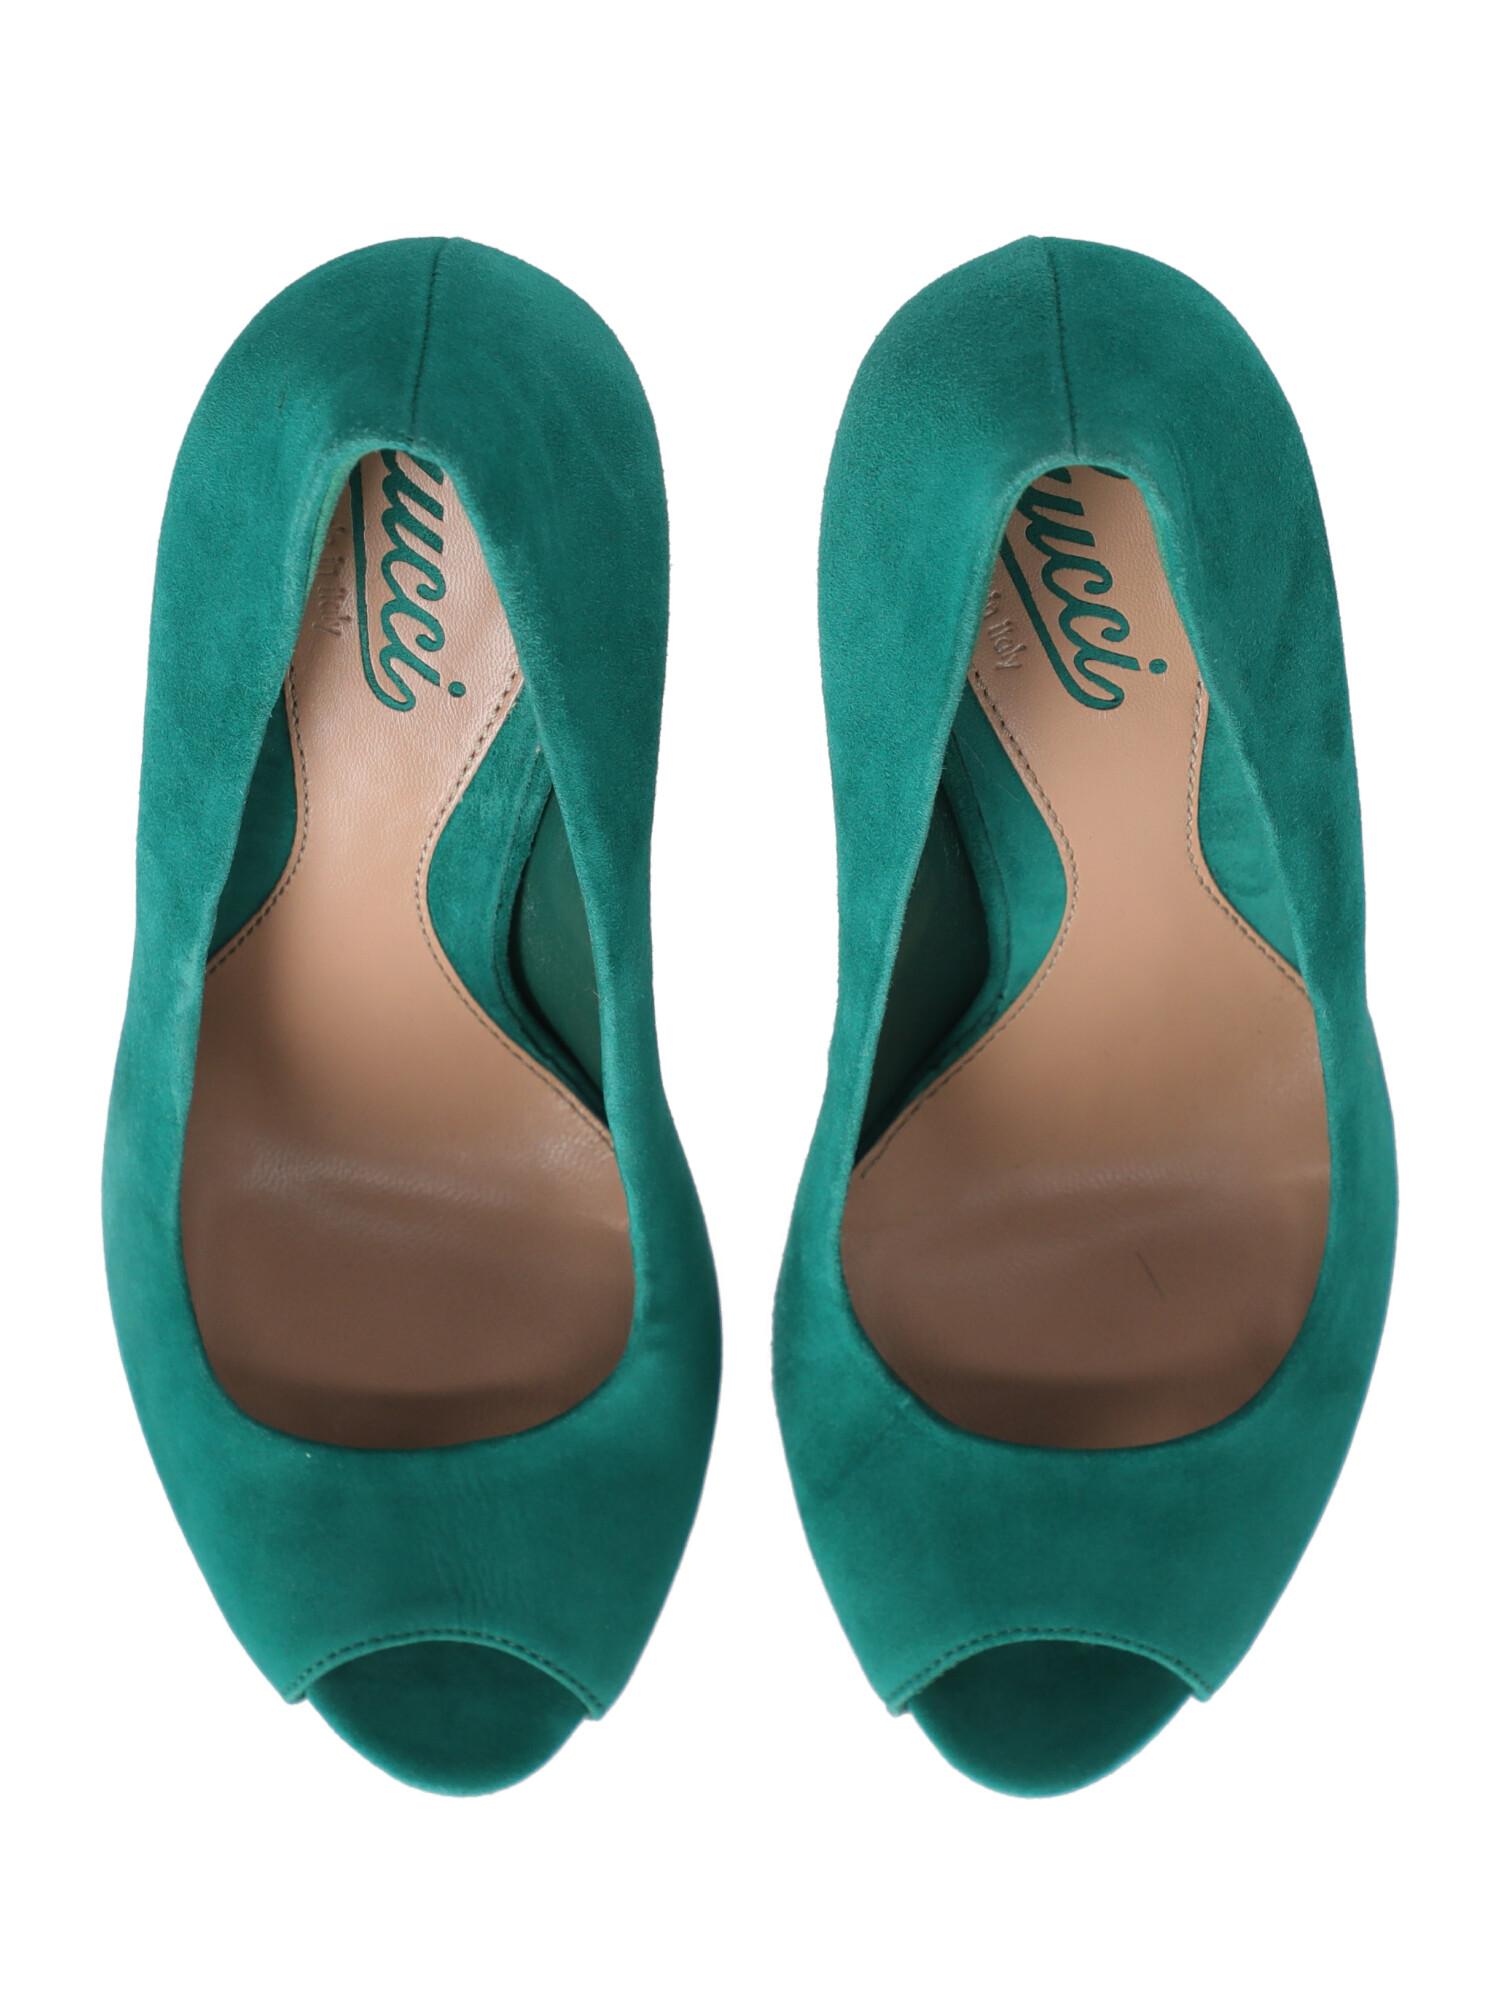 Gucci Woman Pumps Green Leather IT 36.5 For Sale 2